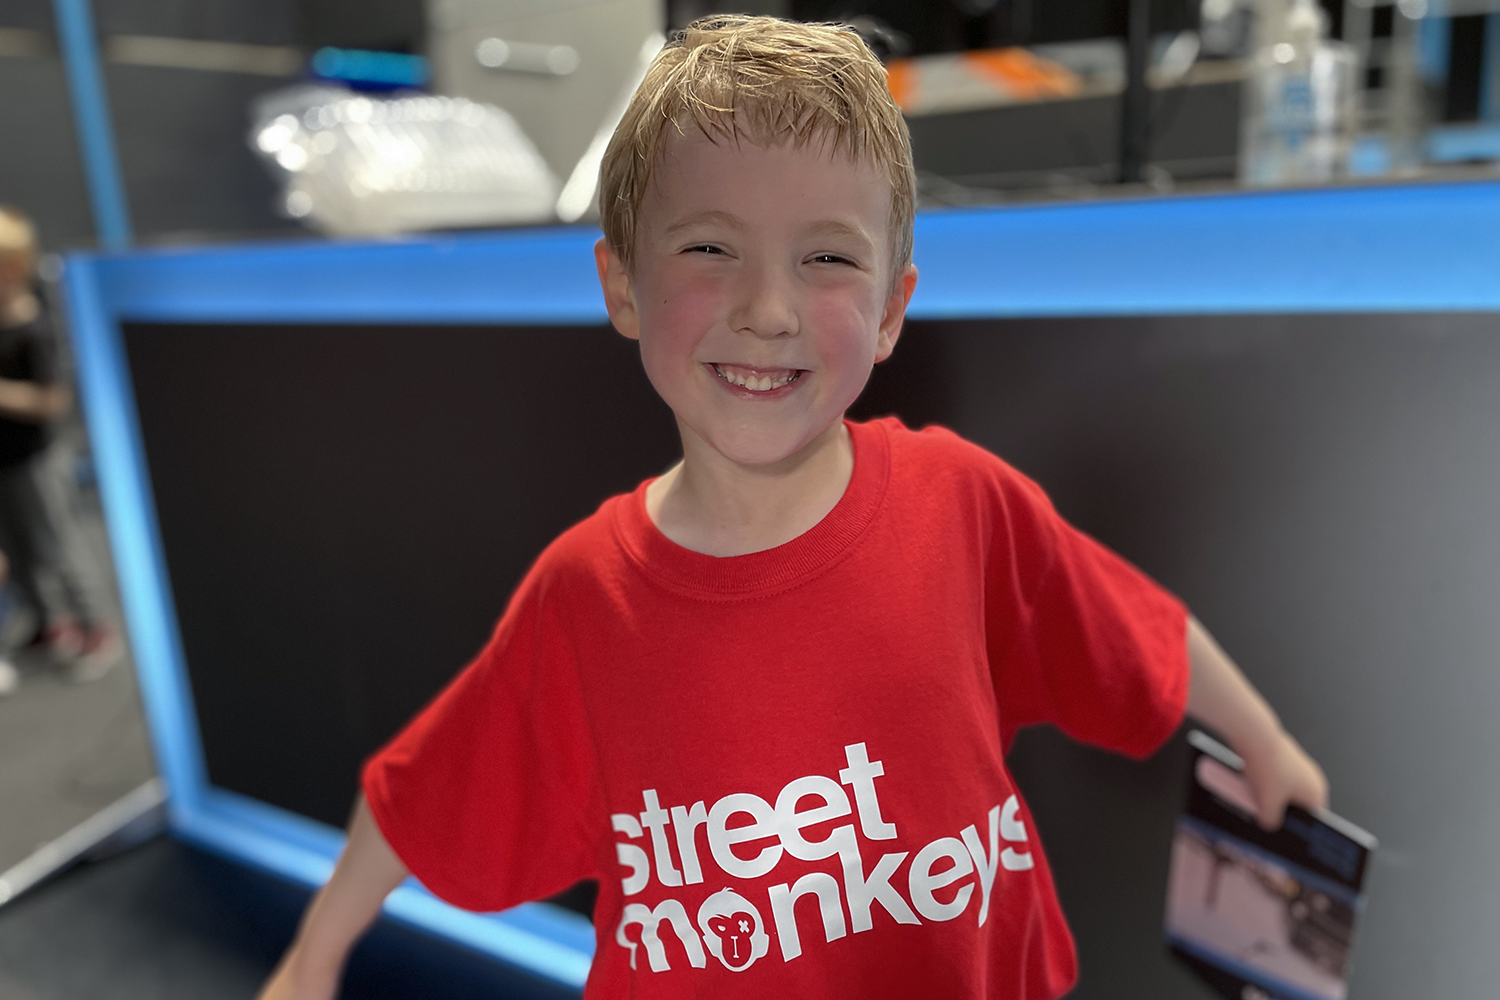 Gabe showing off his new red Street Monkeys t-shirt